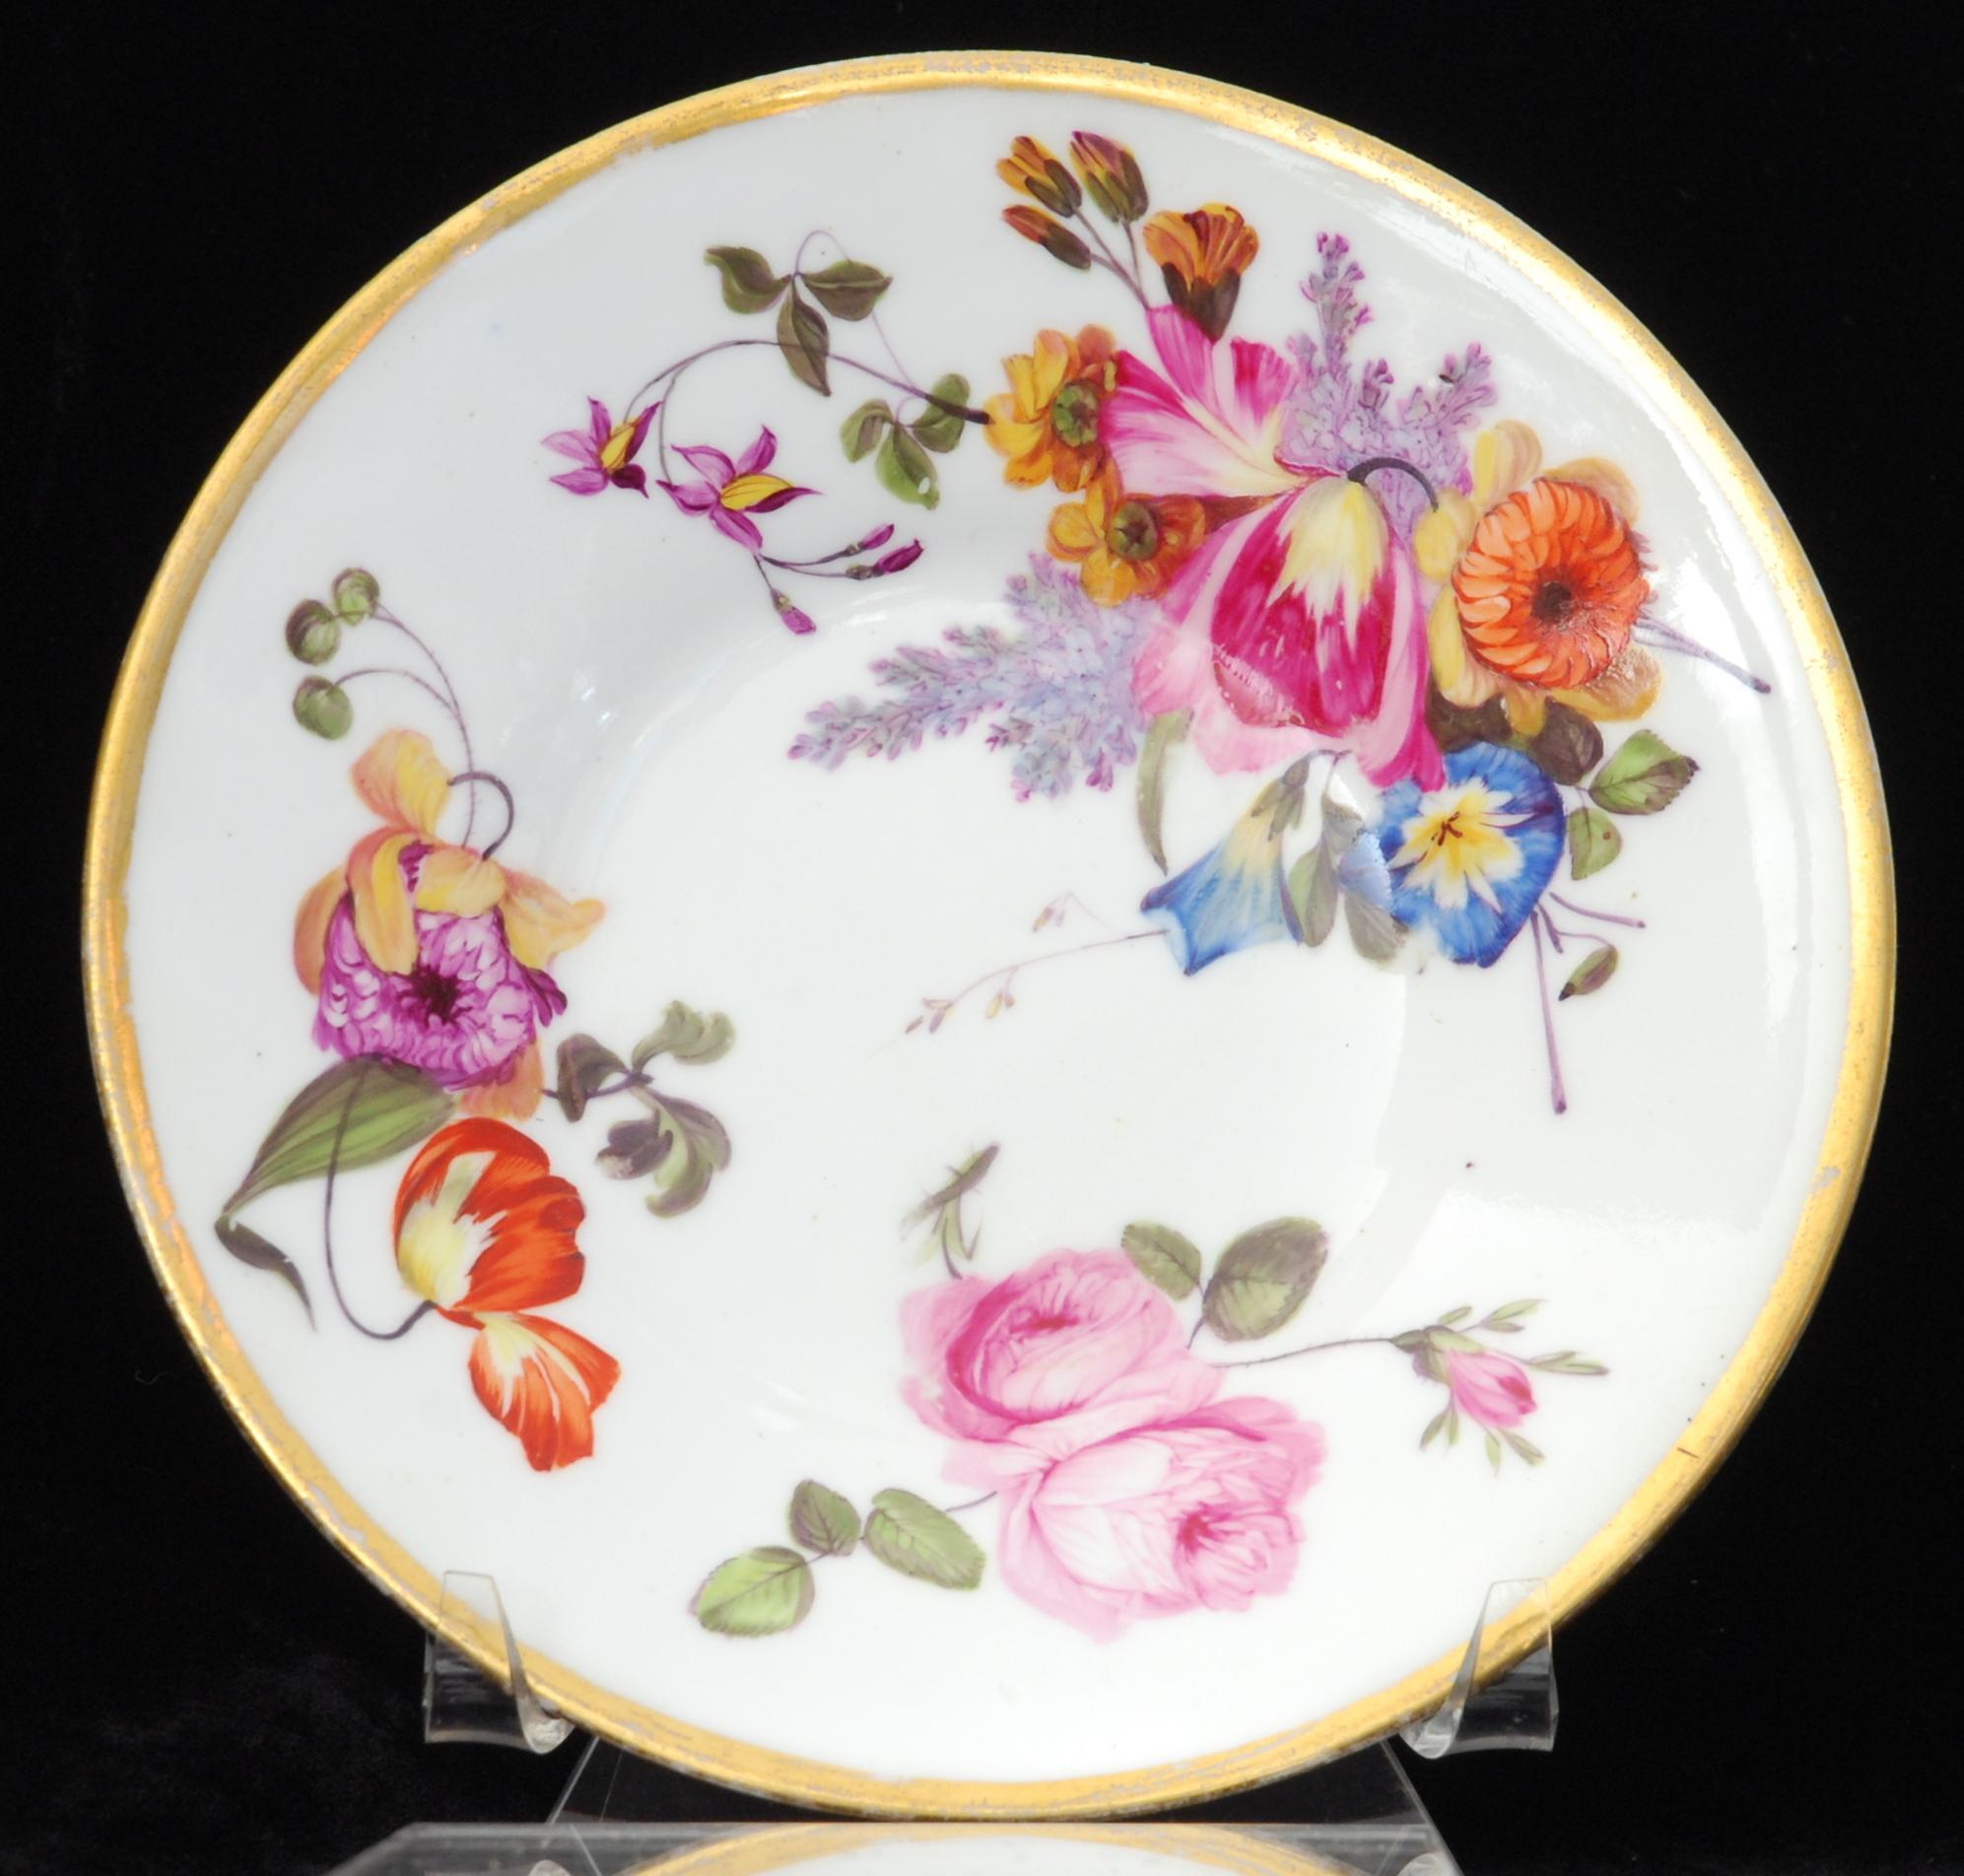 A rare tea cup and saucer in Nantgarw’s superb soft-paste porcelain. Each piece is gilded and decorated in one of the London workshops with superb flower painting, probably by Moses Webster.

The Nantgarw factory lasted only a few years, but their